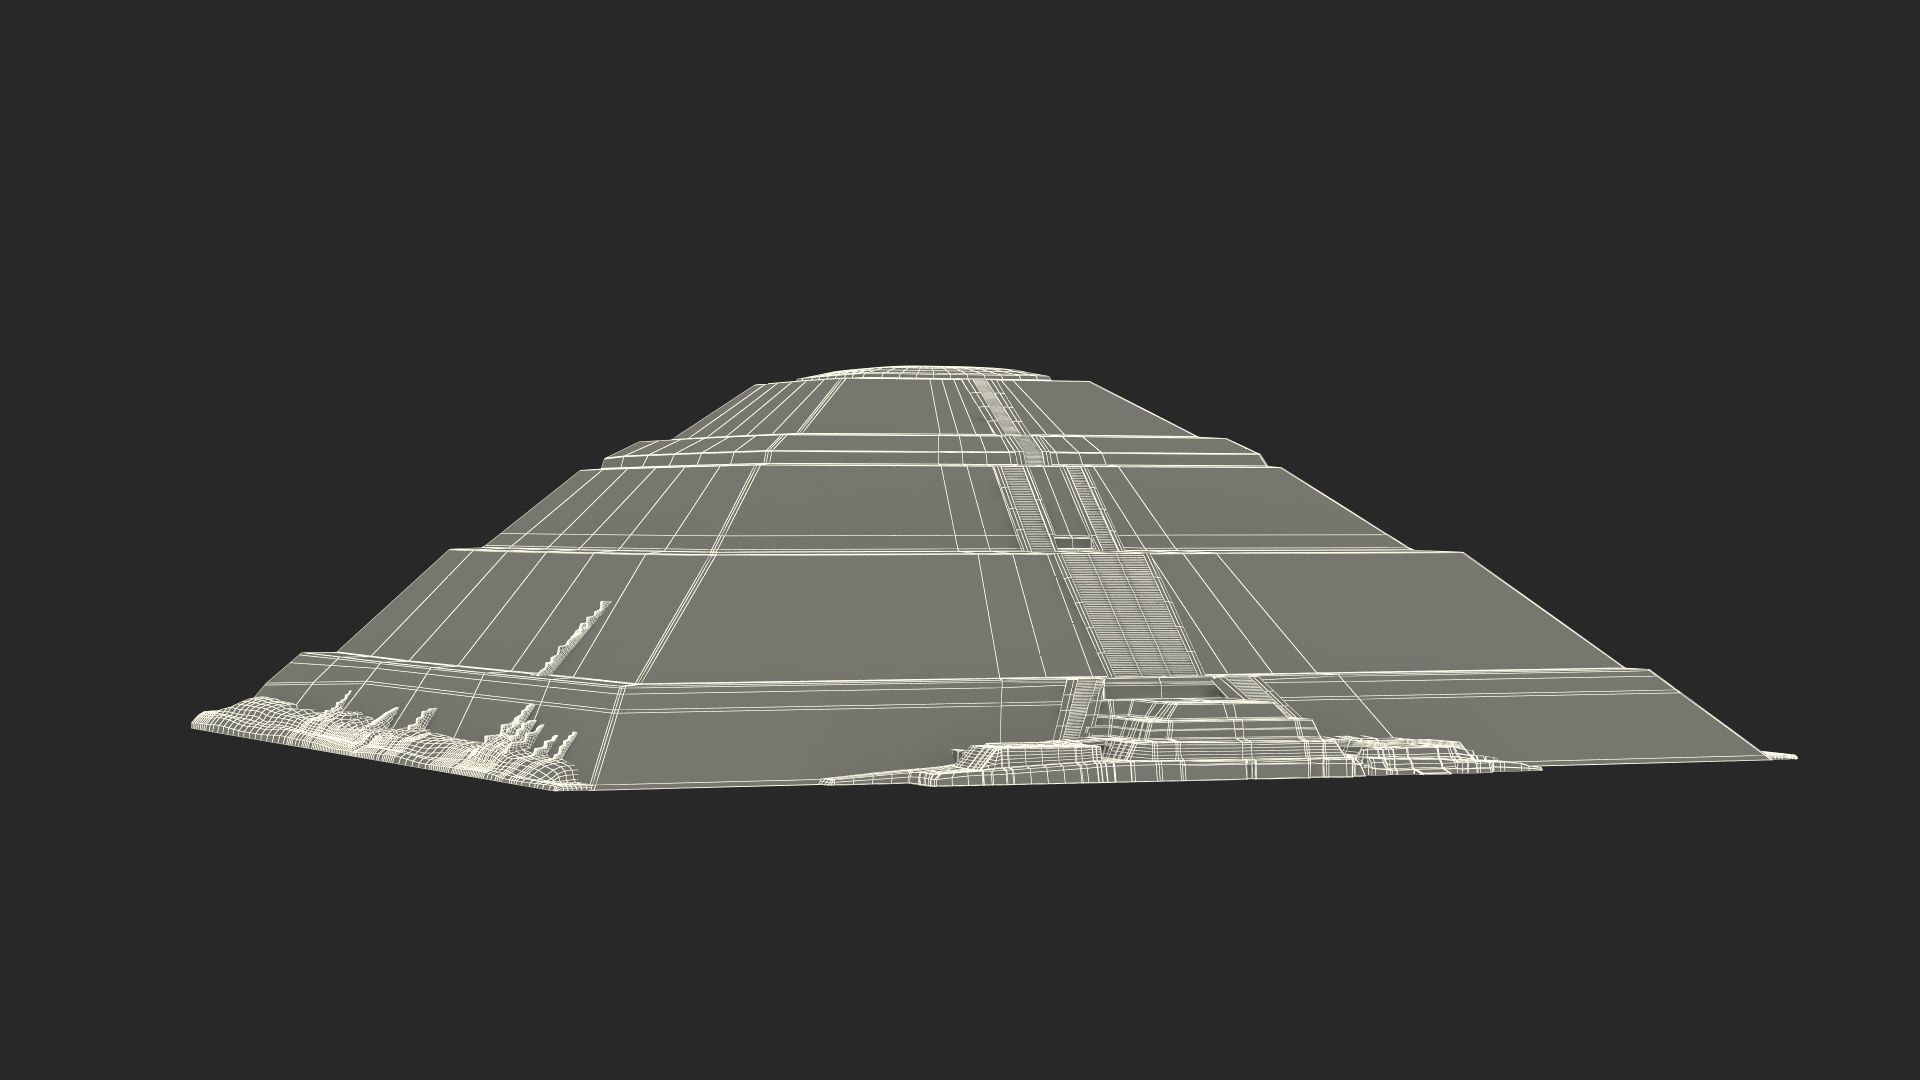 Teotihuacan Pyramid of the Sun 3D model https://p.turbosquid.com/ts-thumb/H1/rMczOv/pM/teotihuacan_pyramid_of_the_sun_361/jpg/1680332157/1920x1080/turn_fit_q99/8c909655b3a103f60ec9ab5d890365a7b2558755/teotihuacan_pyramid_of_the_sun_361-1.jpg